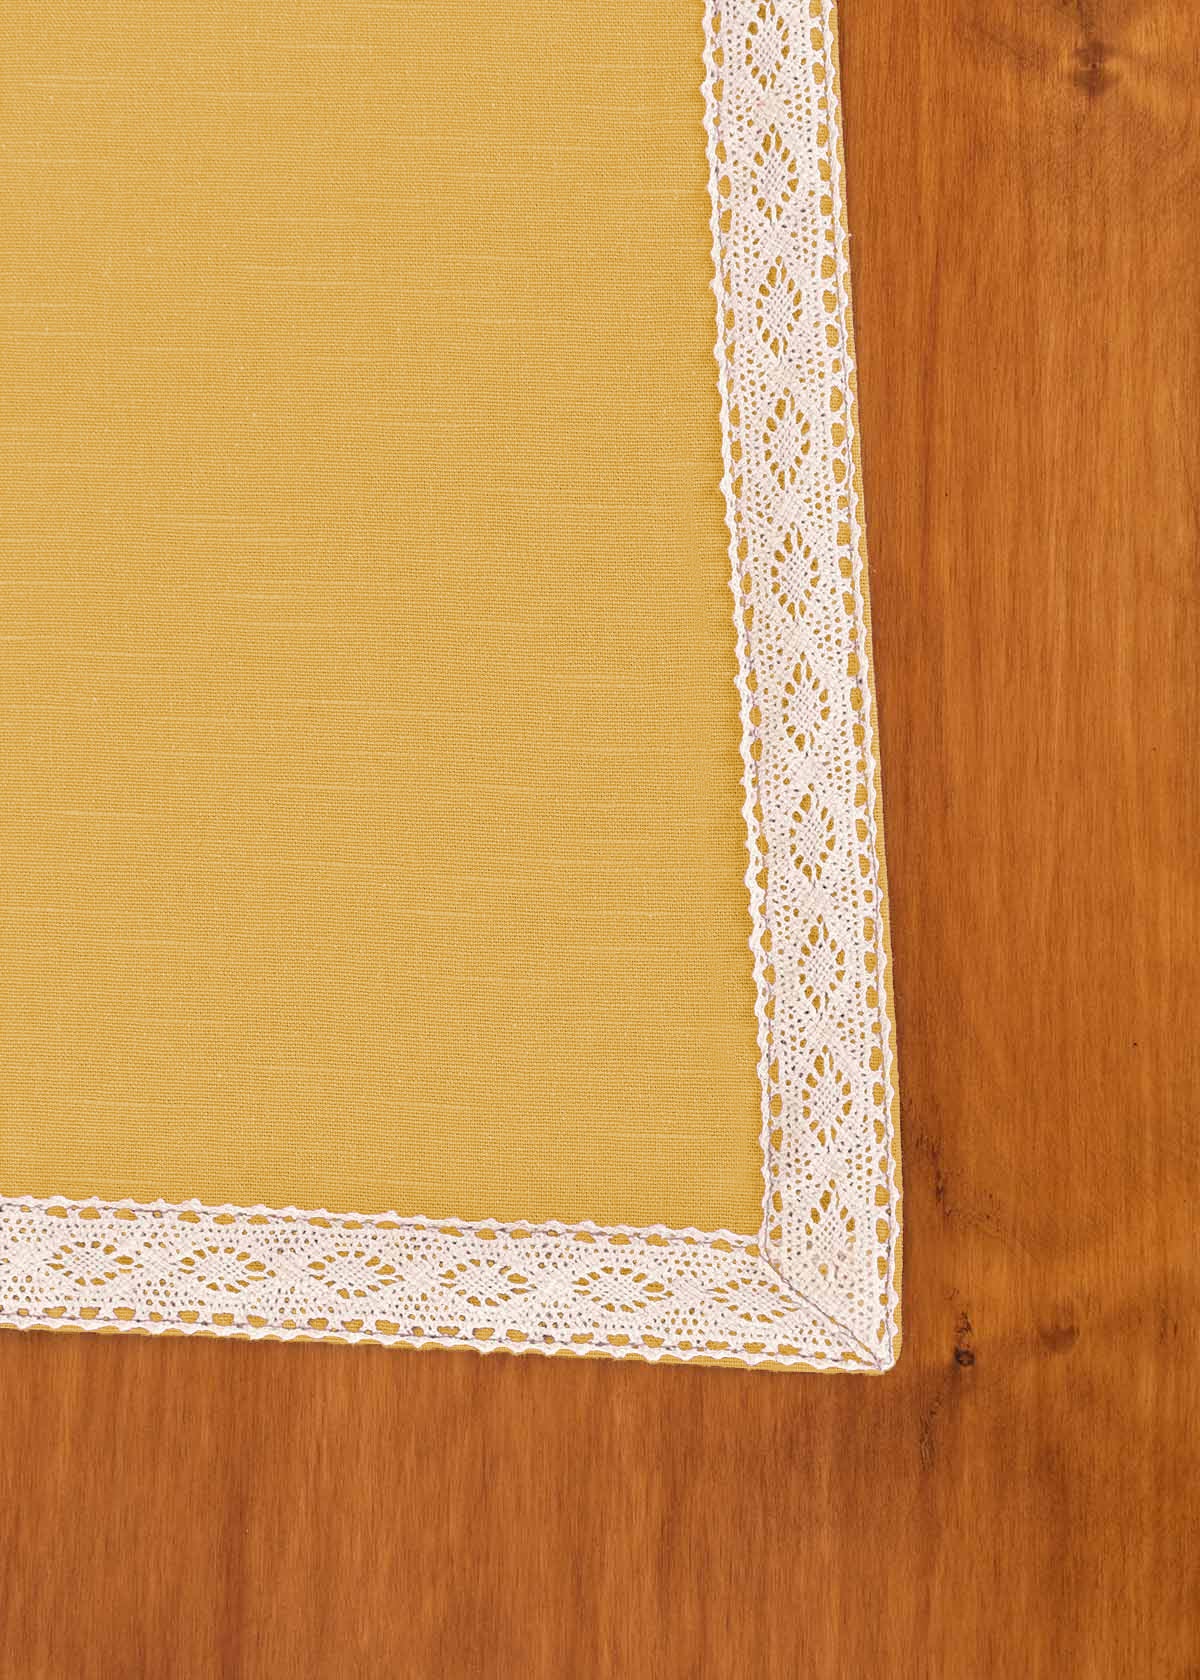 Solid Mustard 100% cotton plain table cloth for 4 seater or 6 seater dining with lace border